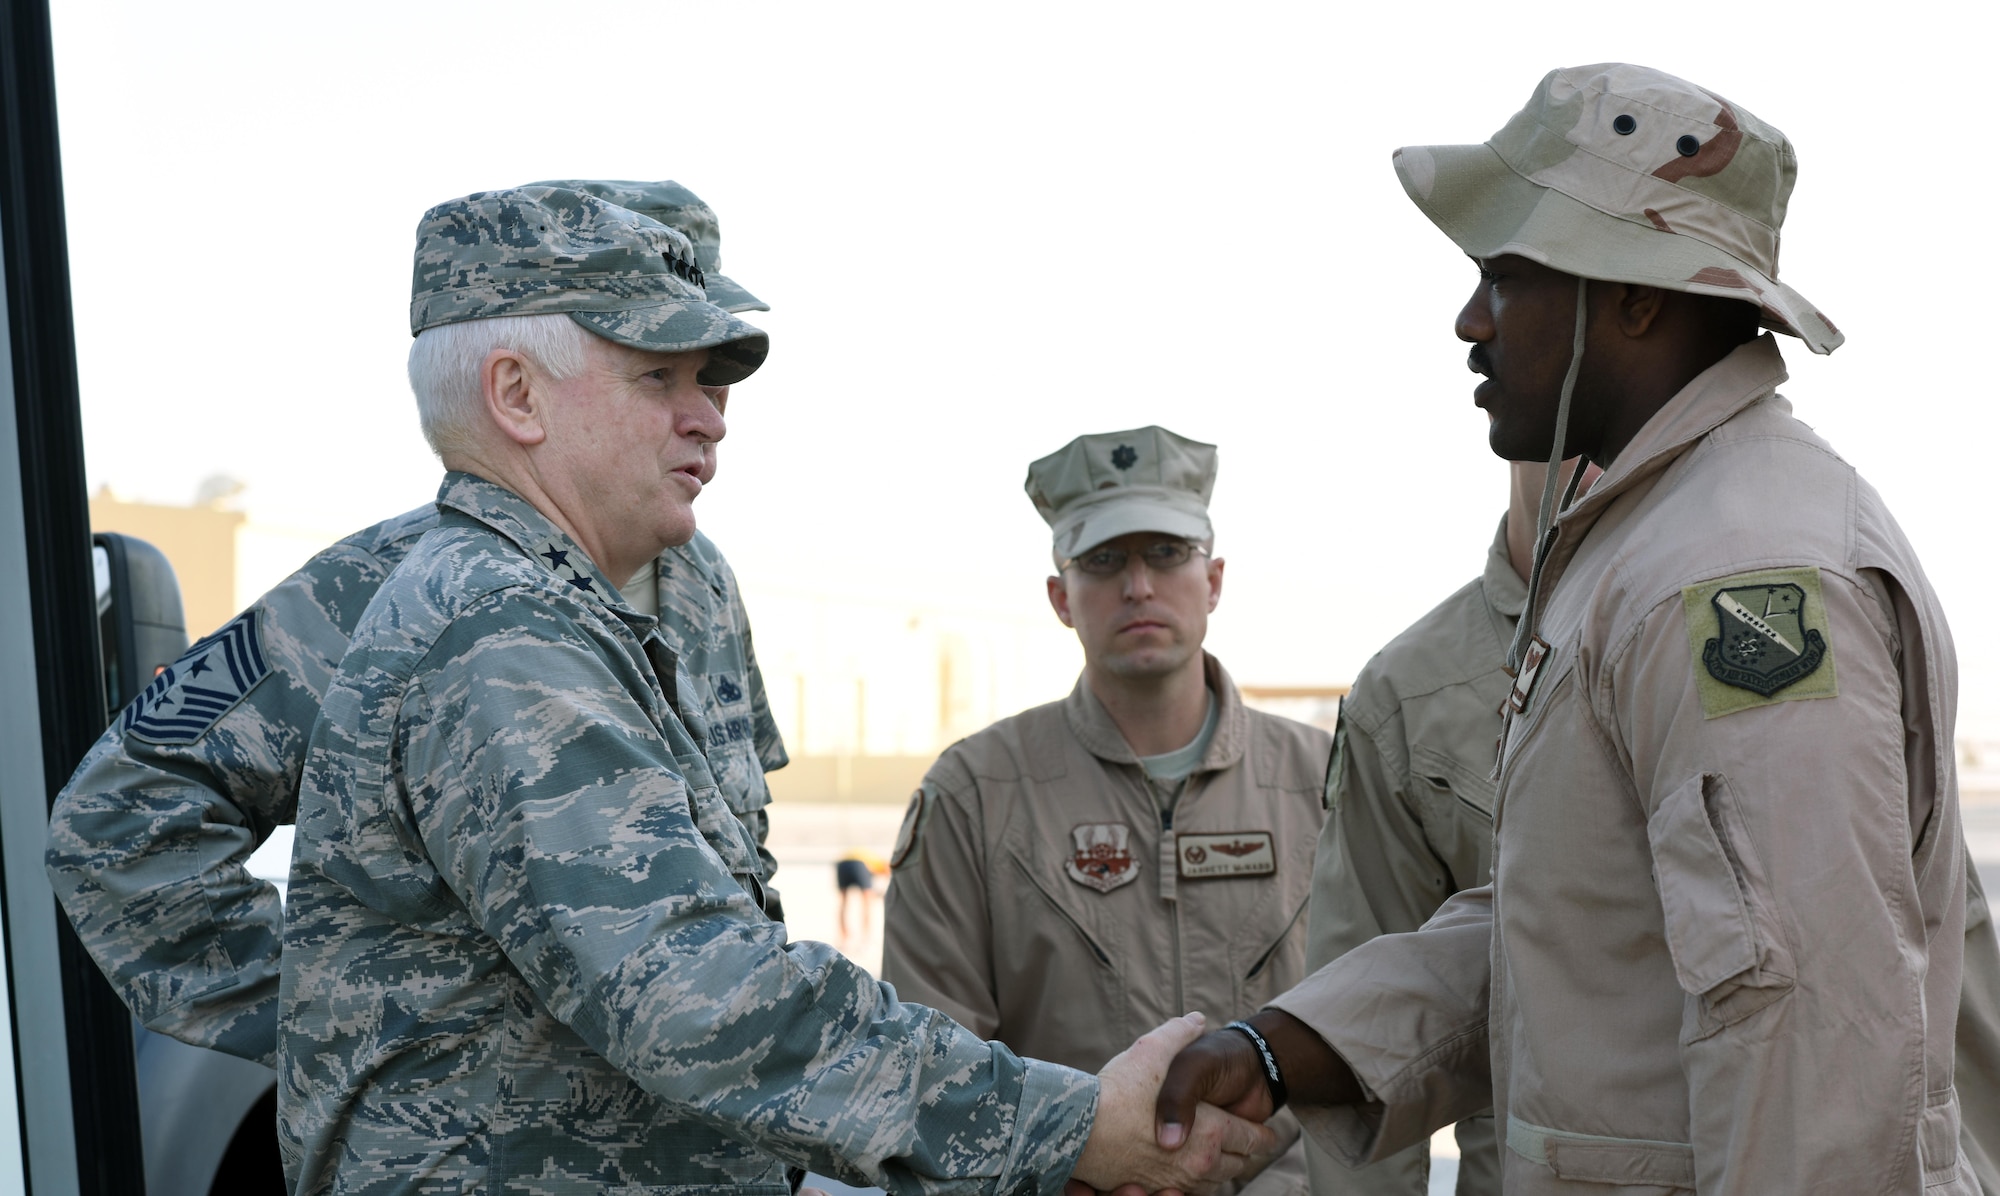 U.S. Air Force Lt. Gen. L. Scott Rice, director of the Air National Guard, shakes hands with Airmen with the 340th Expeditionary Air Refueling Squadron at Al Udeid Air Base, Qatar, Jan. 4, 2016. Rice expressed his gratitude for those serving in the deployed environment and for their continued patriotism. (U.S. Air Force photo by Senior Airman Cynthia A. Innocenti)